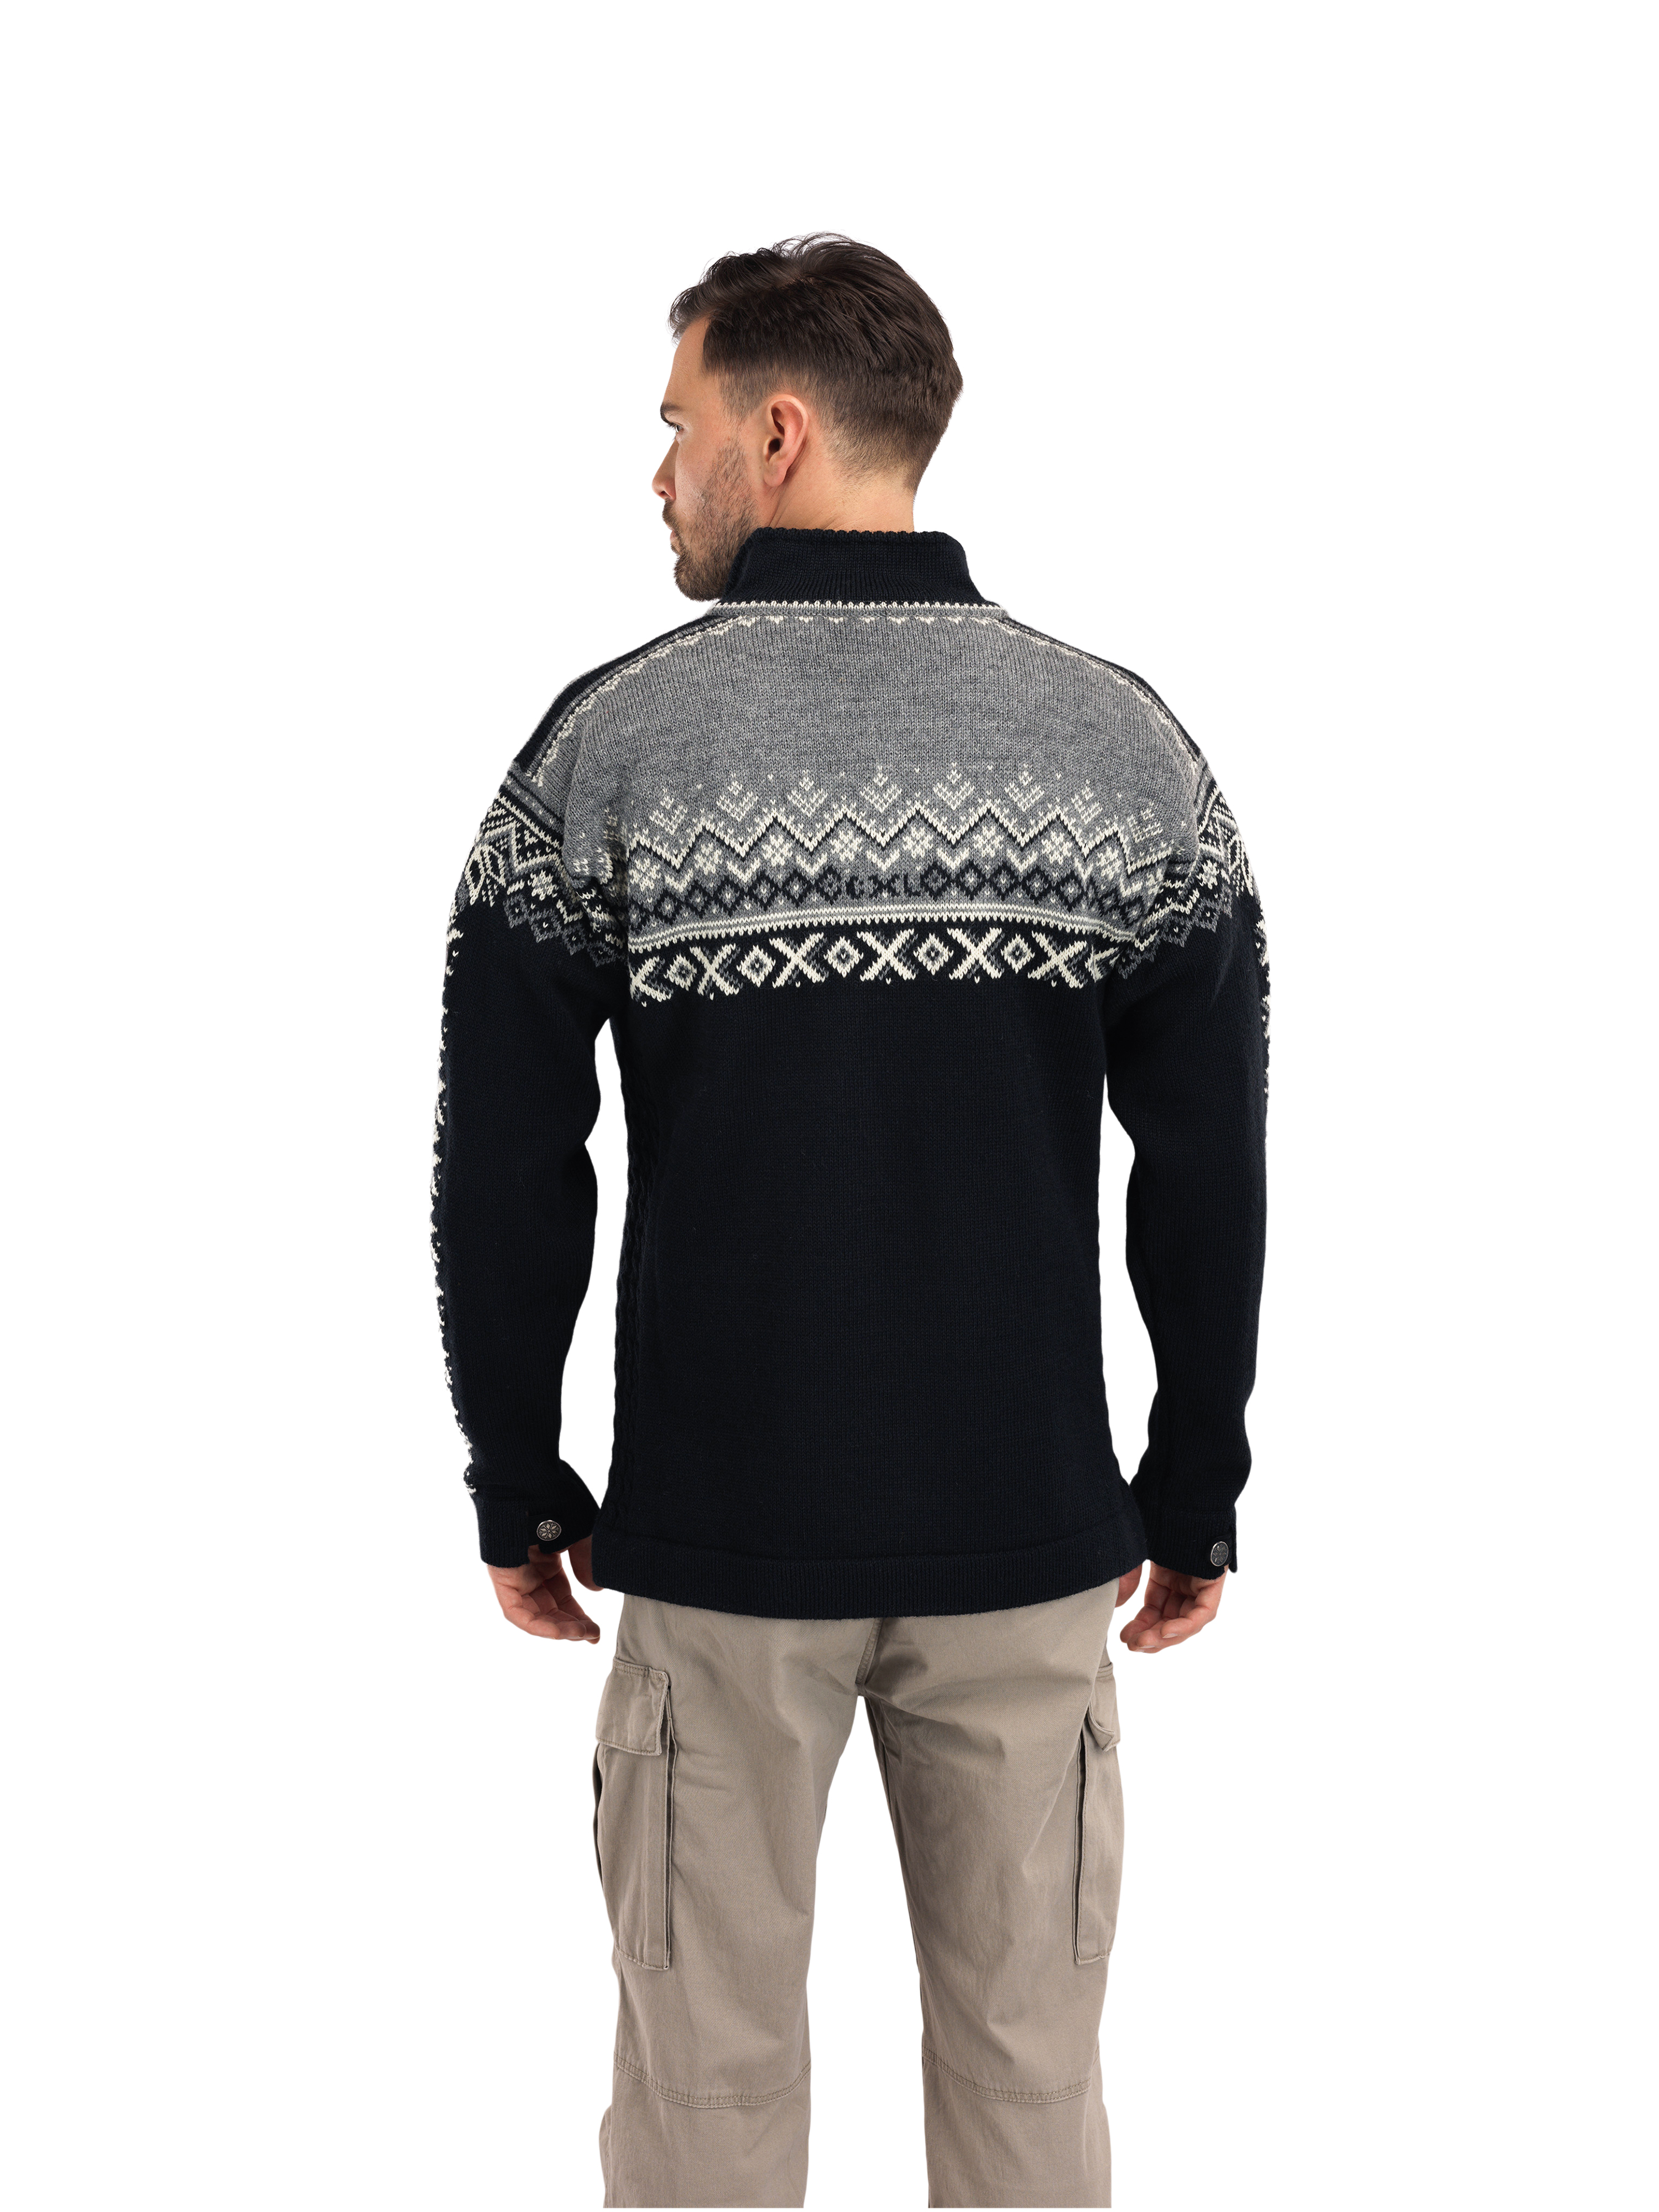 140th Anniversary Sweater - Men - Black - Dale of Norway - Dale of